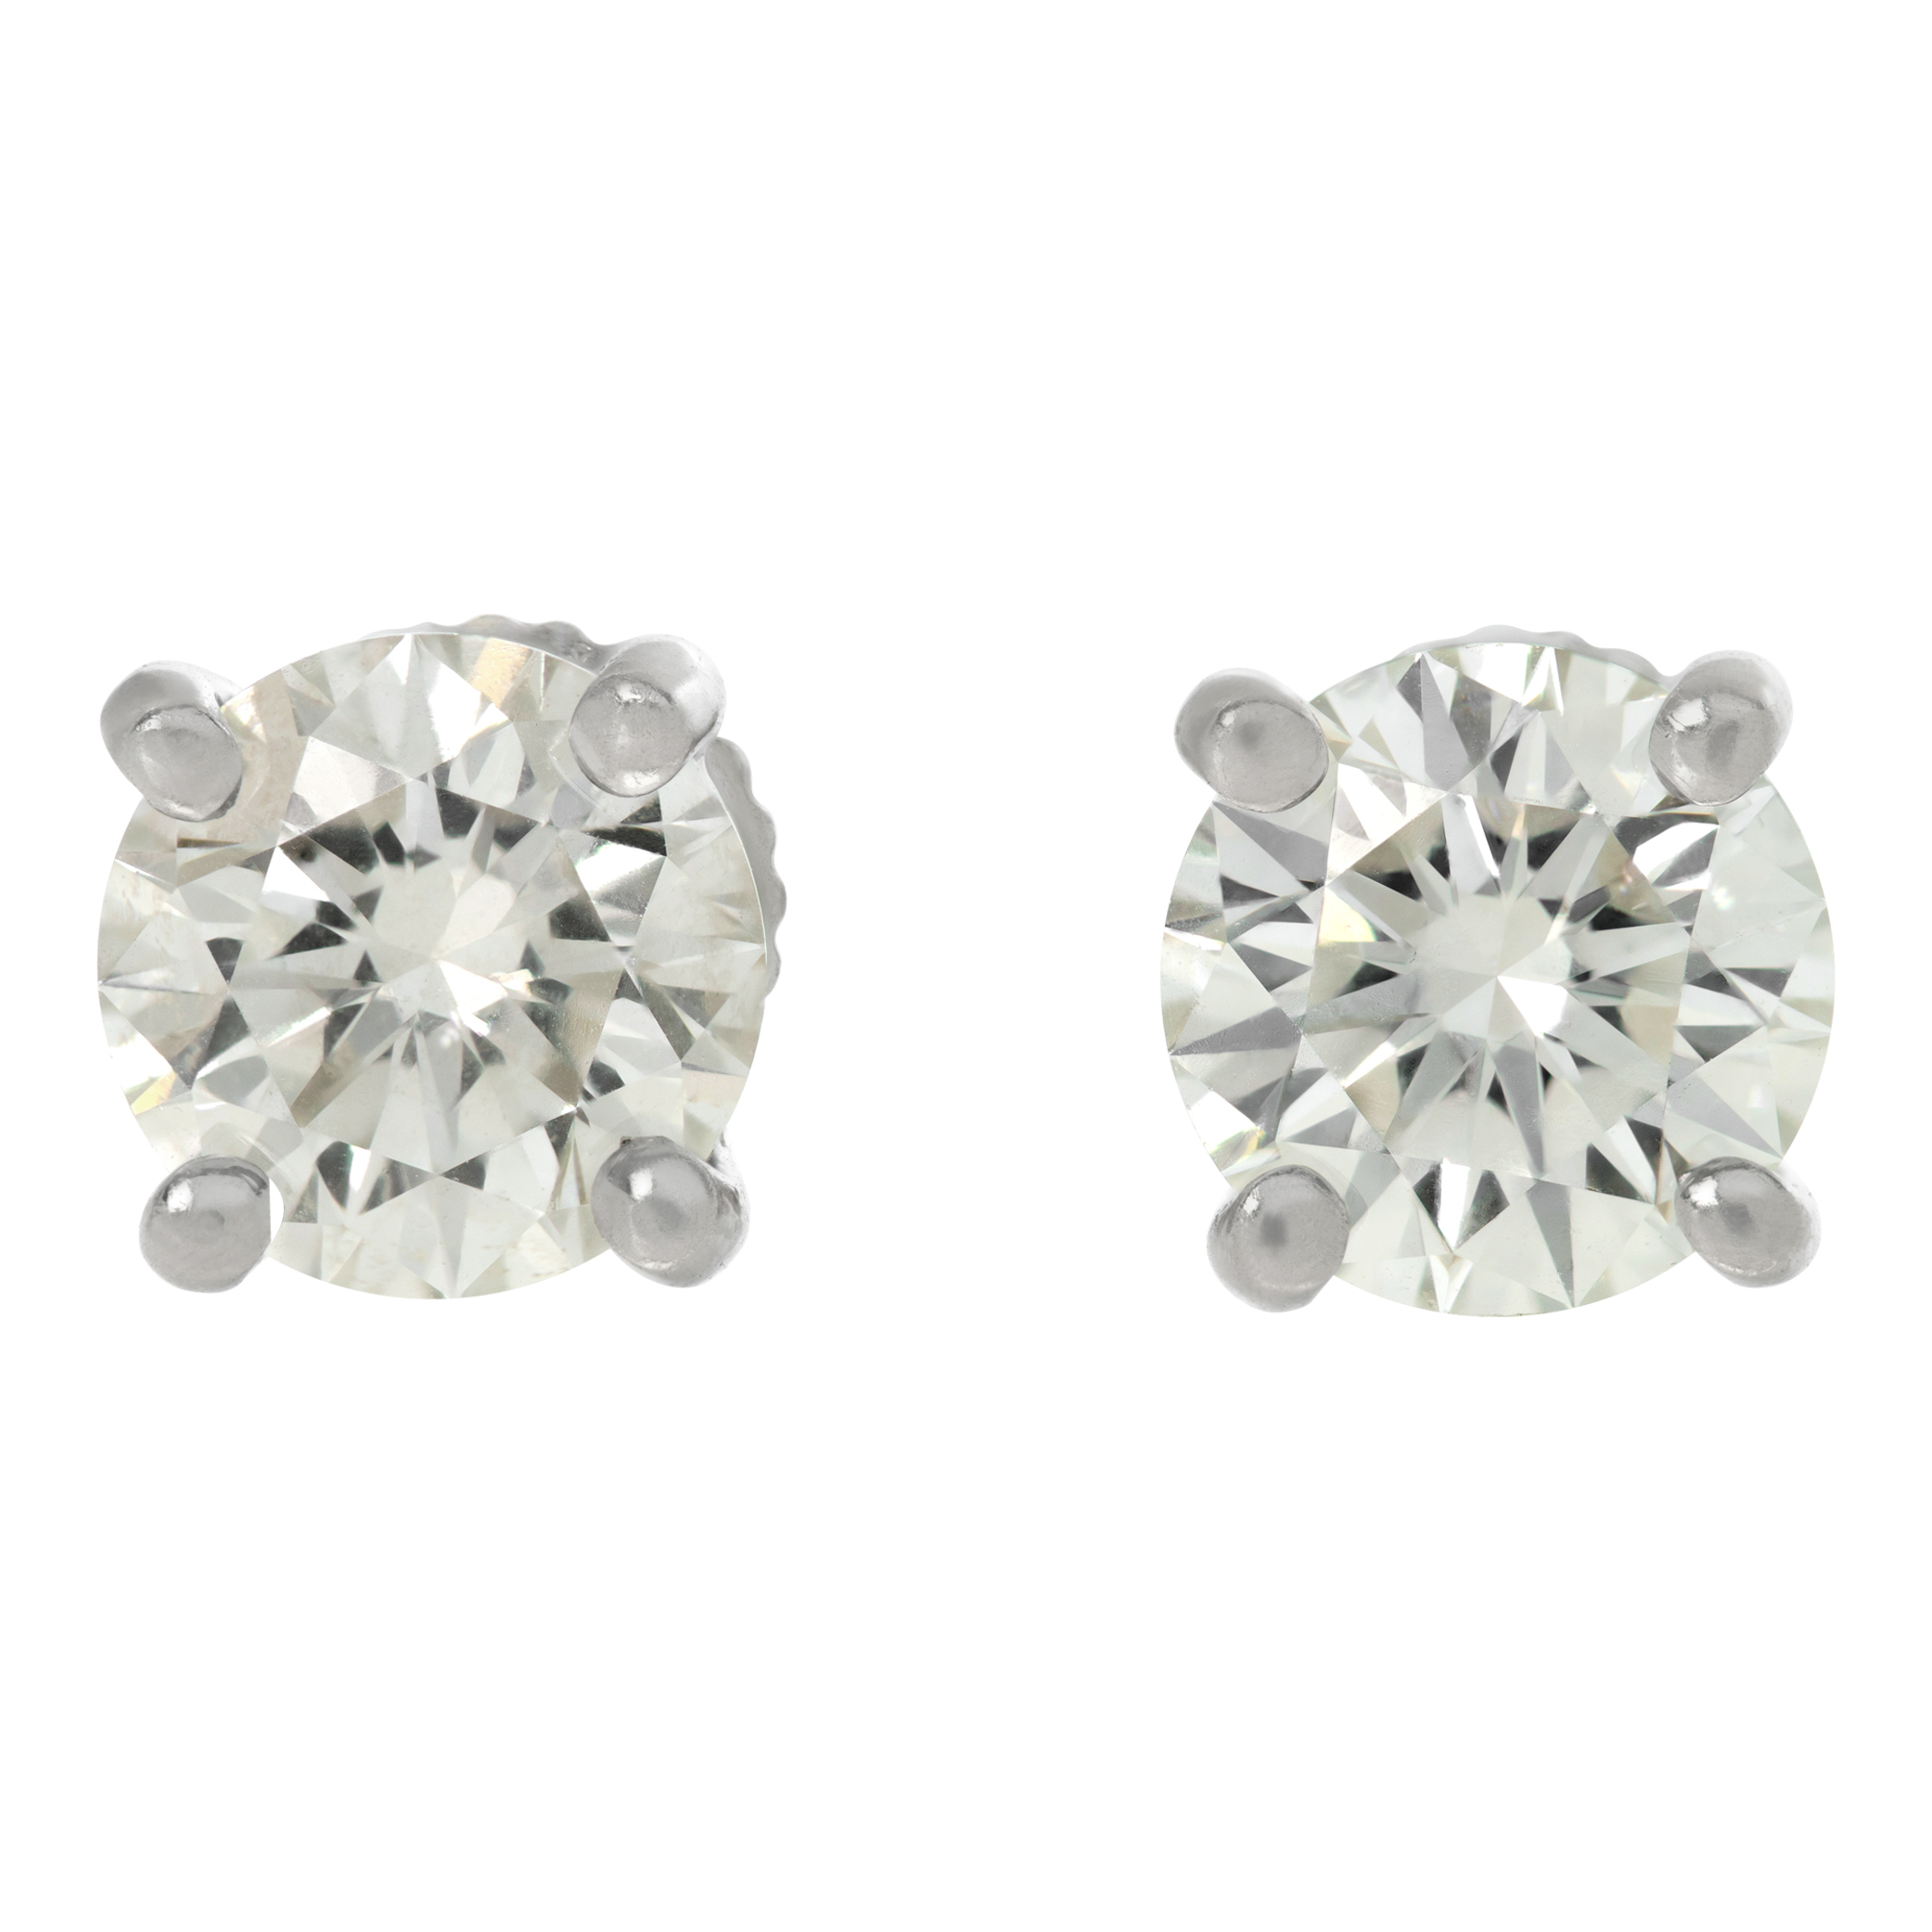 Tiffany & Co. Diamond stud earrings in platinum. 1.02 carats and 1.01 carats G VS1